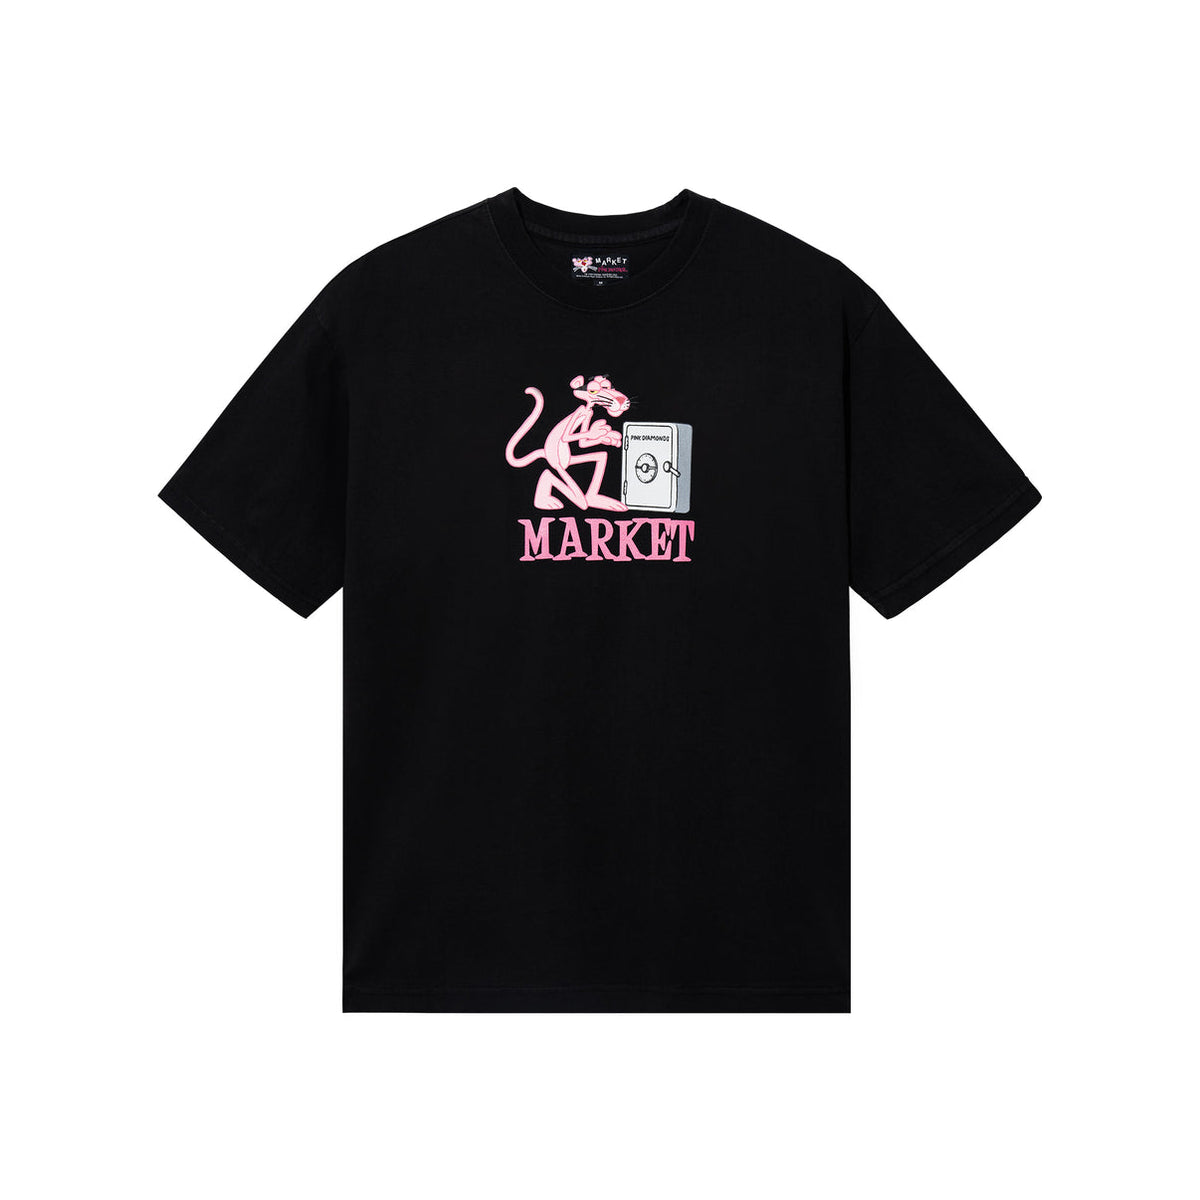 Pink Panther Call My Lawyer Tee - Black